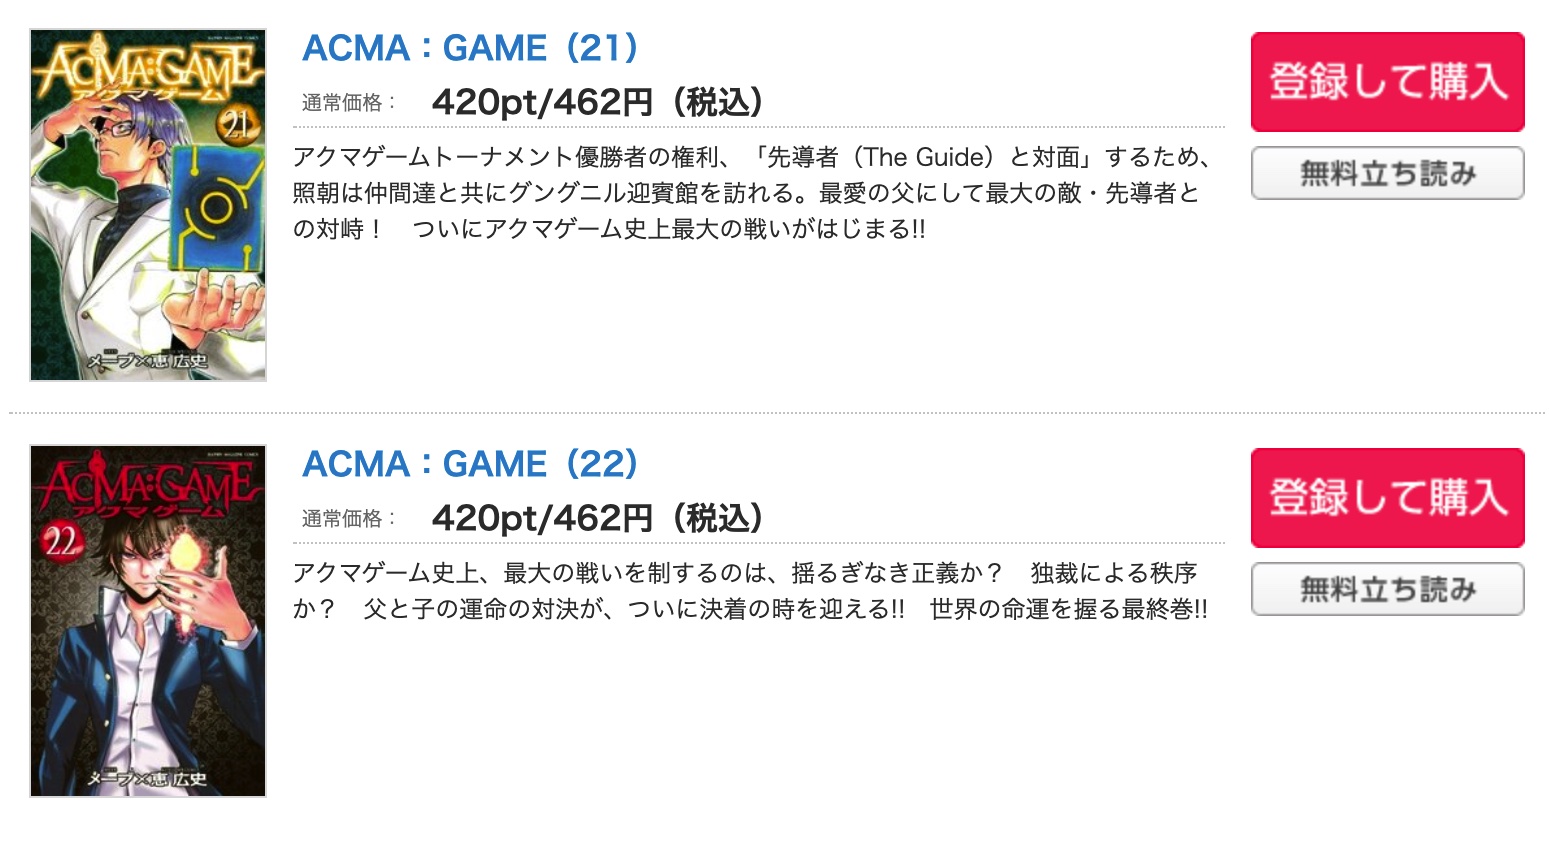 ACMA：GAME コミックシーモア 試し読み 